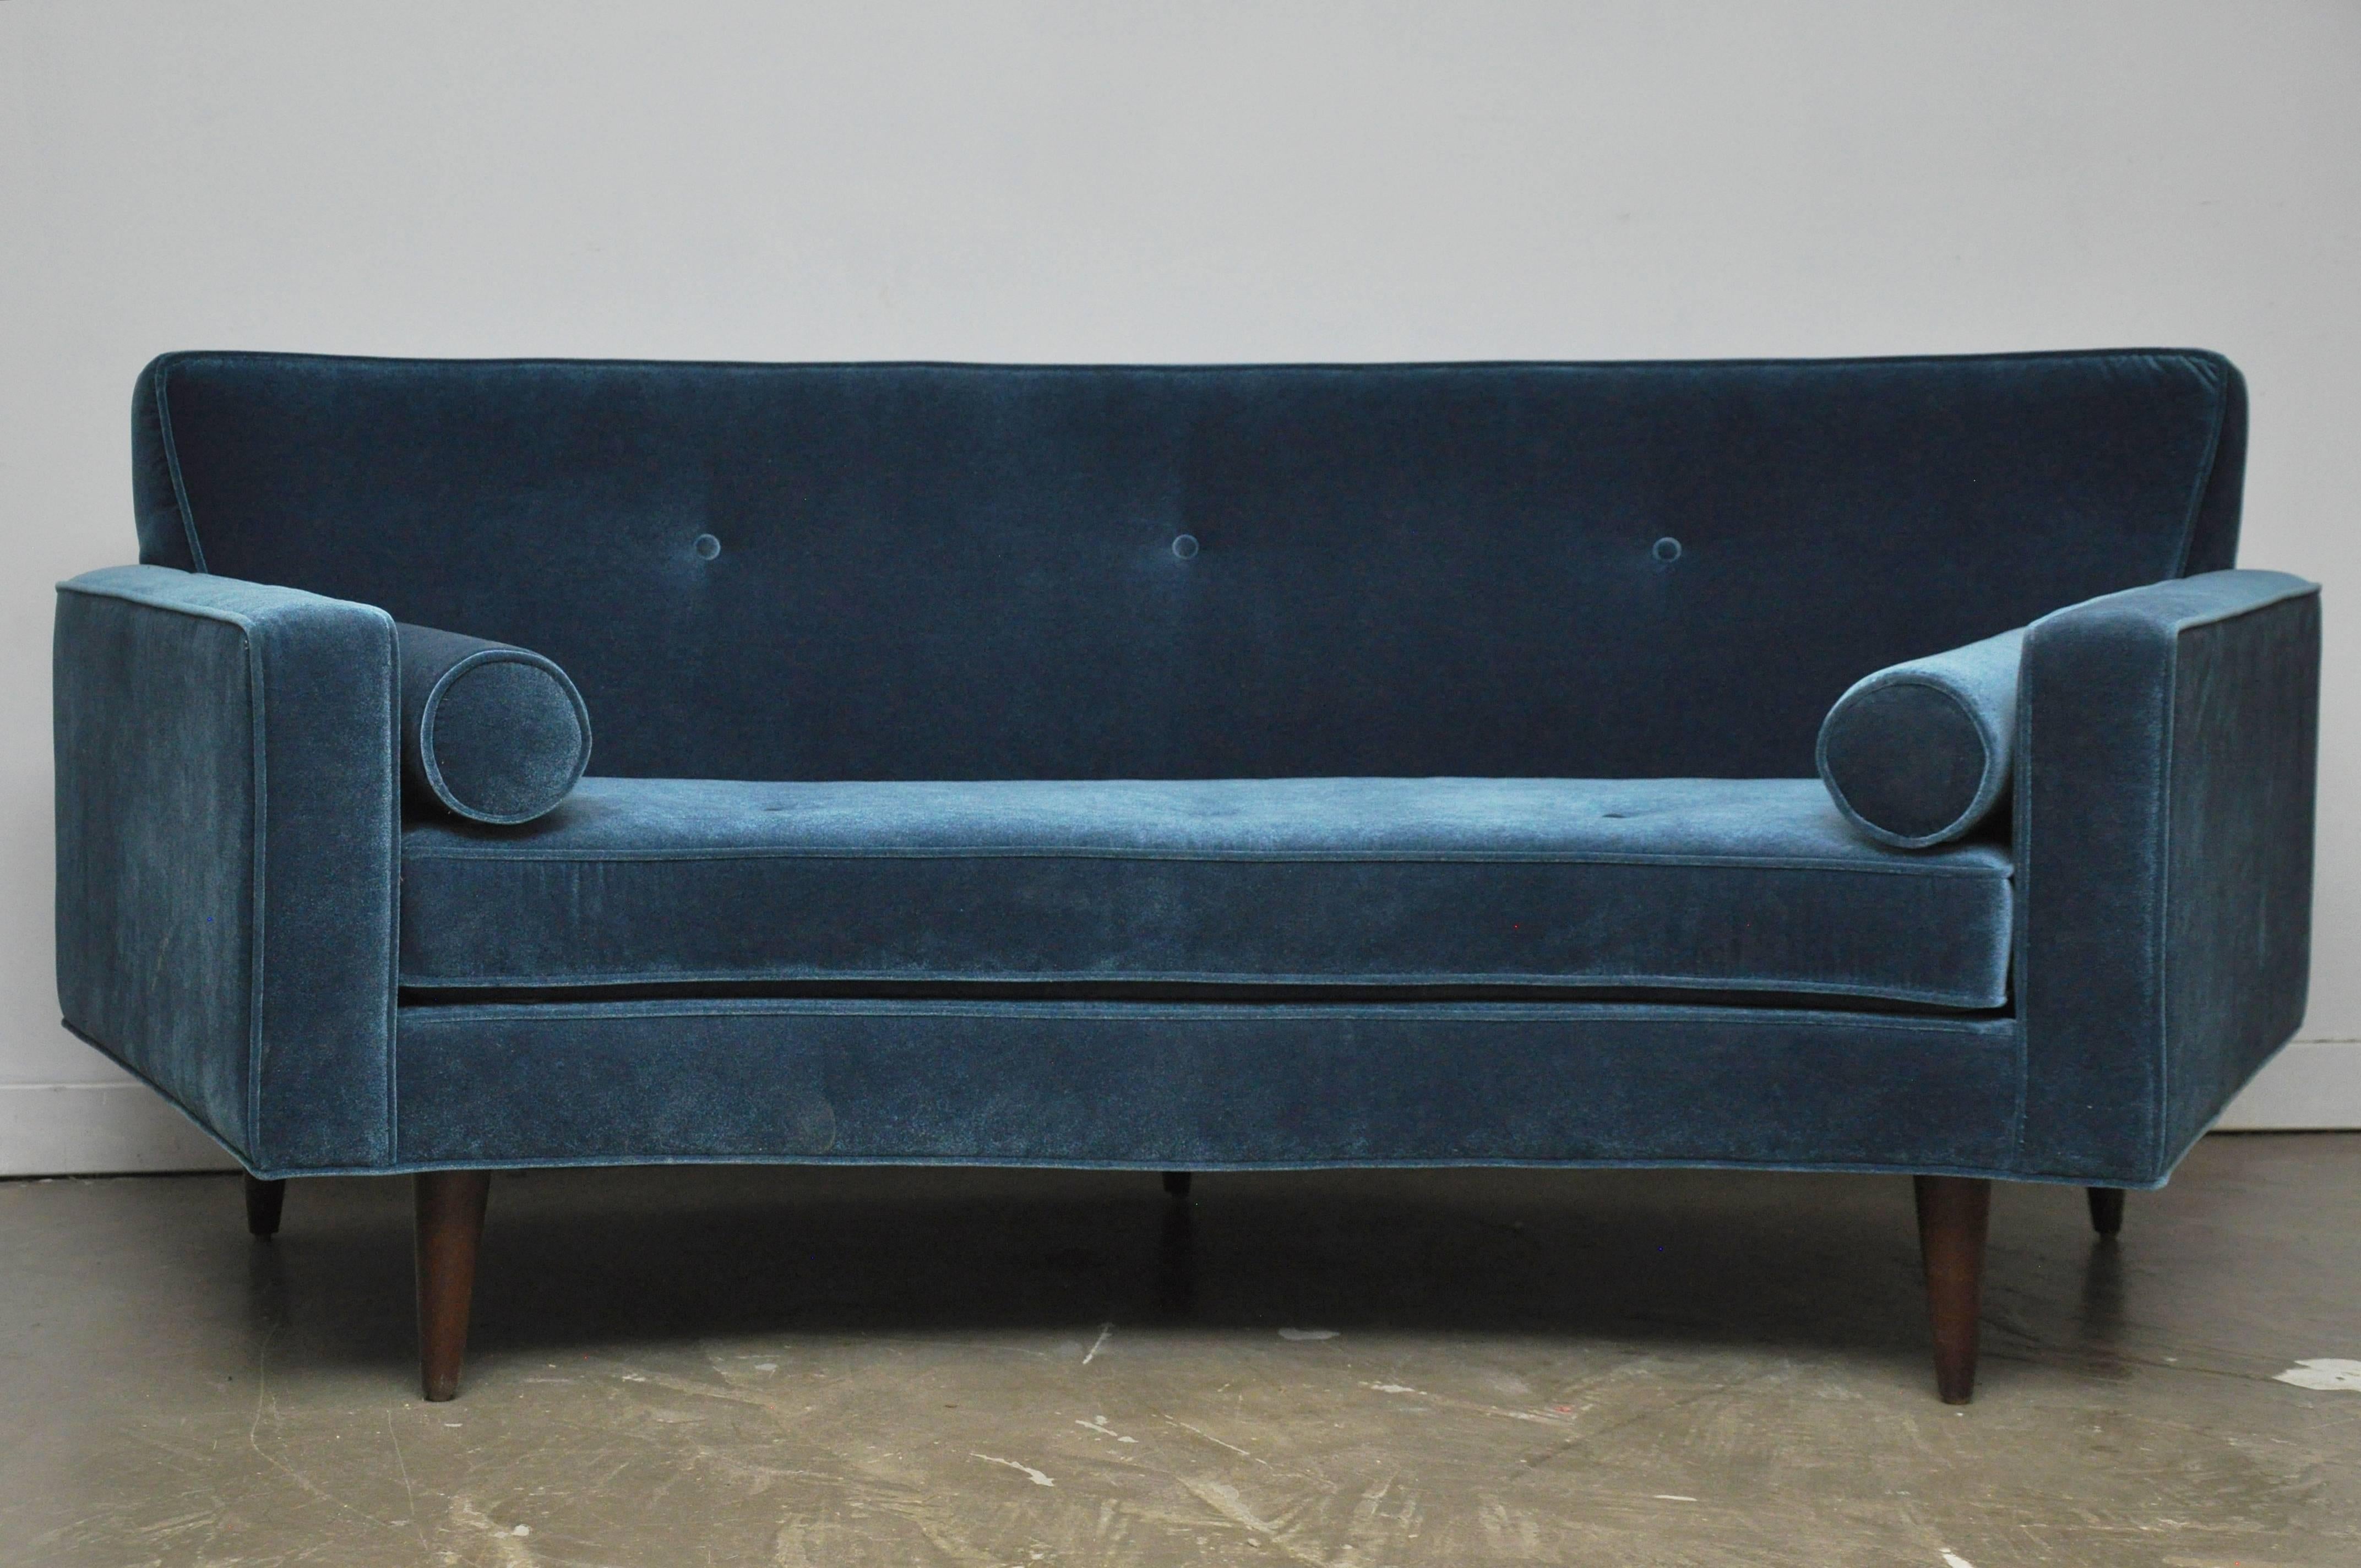 Curved settee by Harvey Probber. Fully restored and reupholstered. A beautiful form in blue, with bolster pillows at each end.